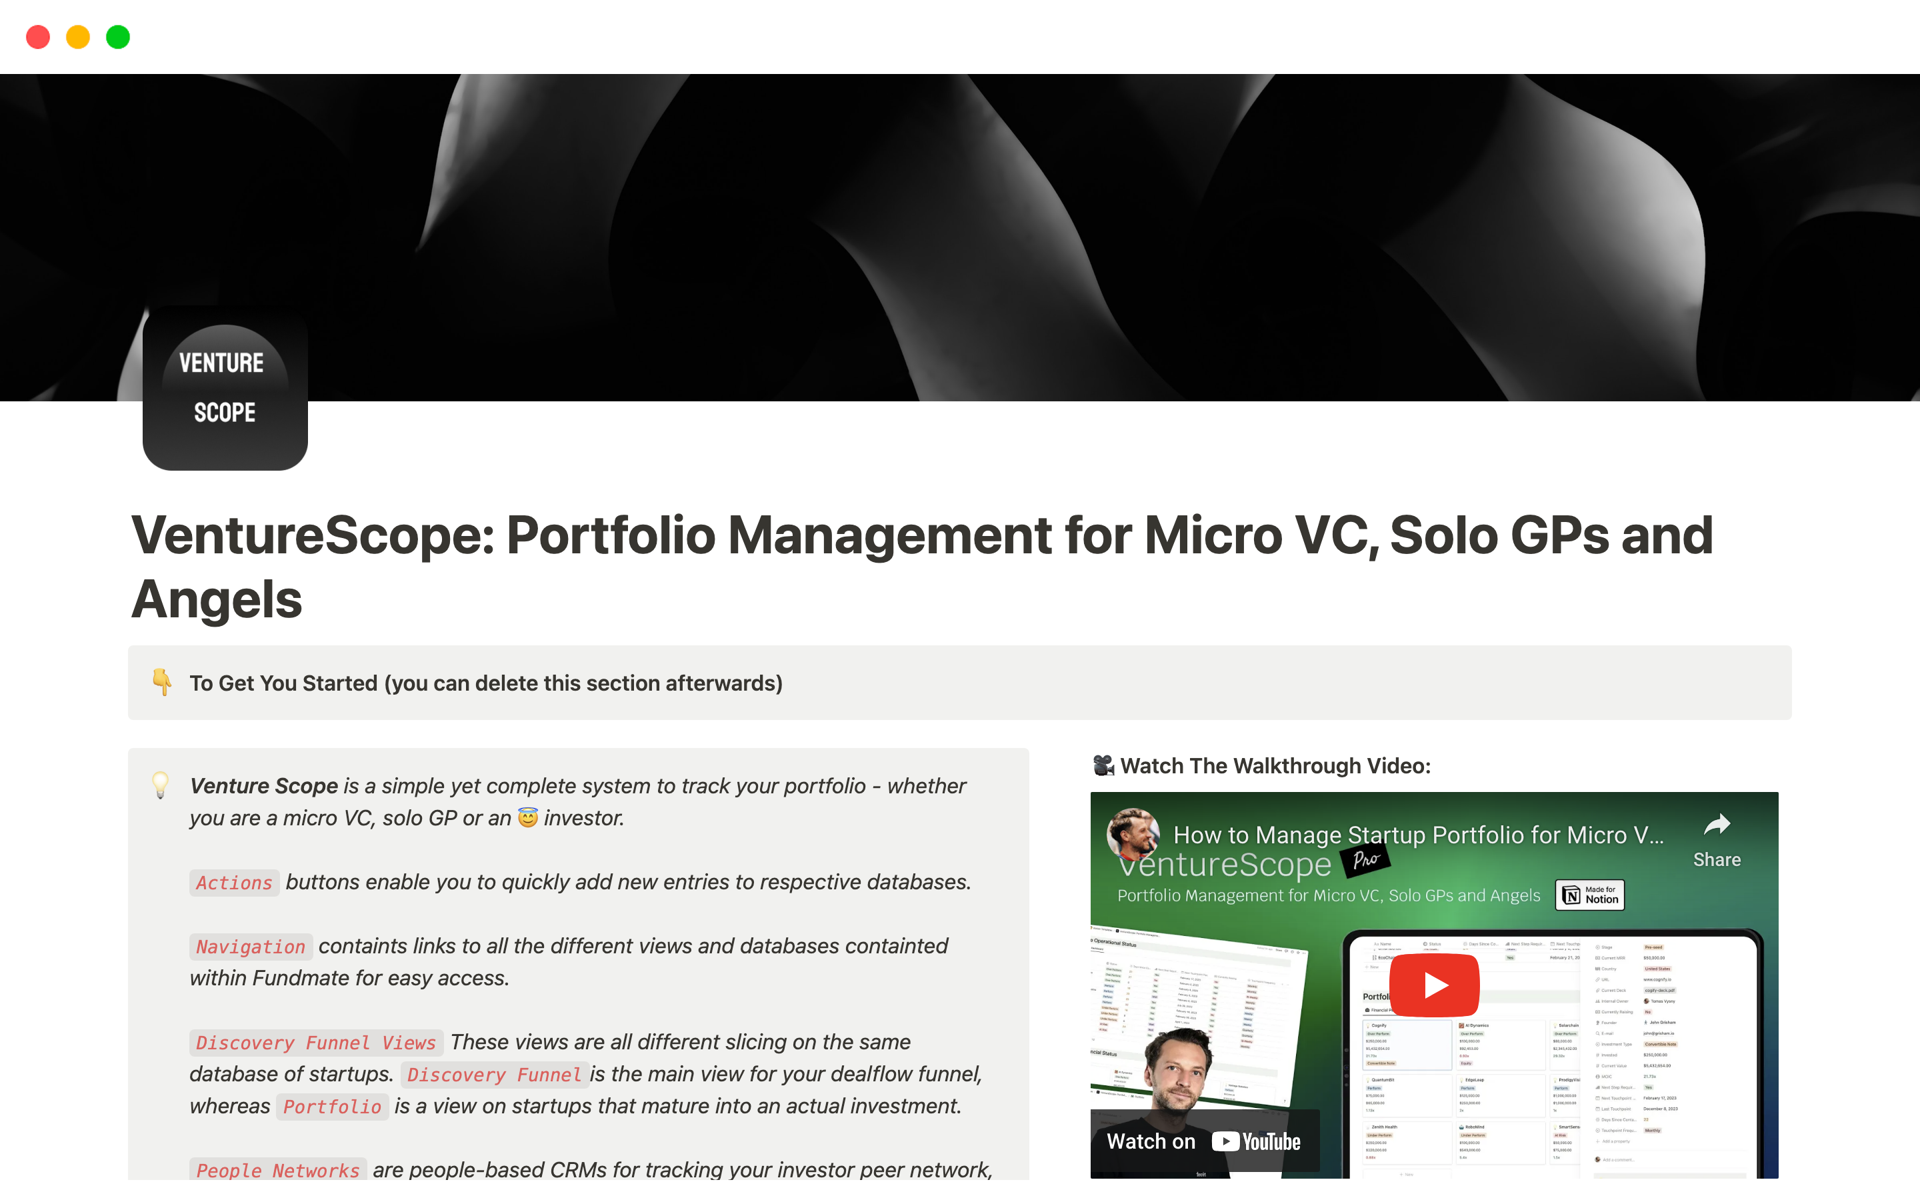 VentureScope streamlines management of portfolio investments (startups) for Micro VCs, Solo GPs, and Angel Investors.

